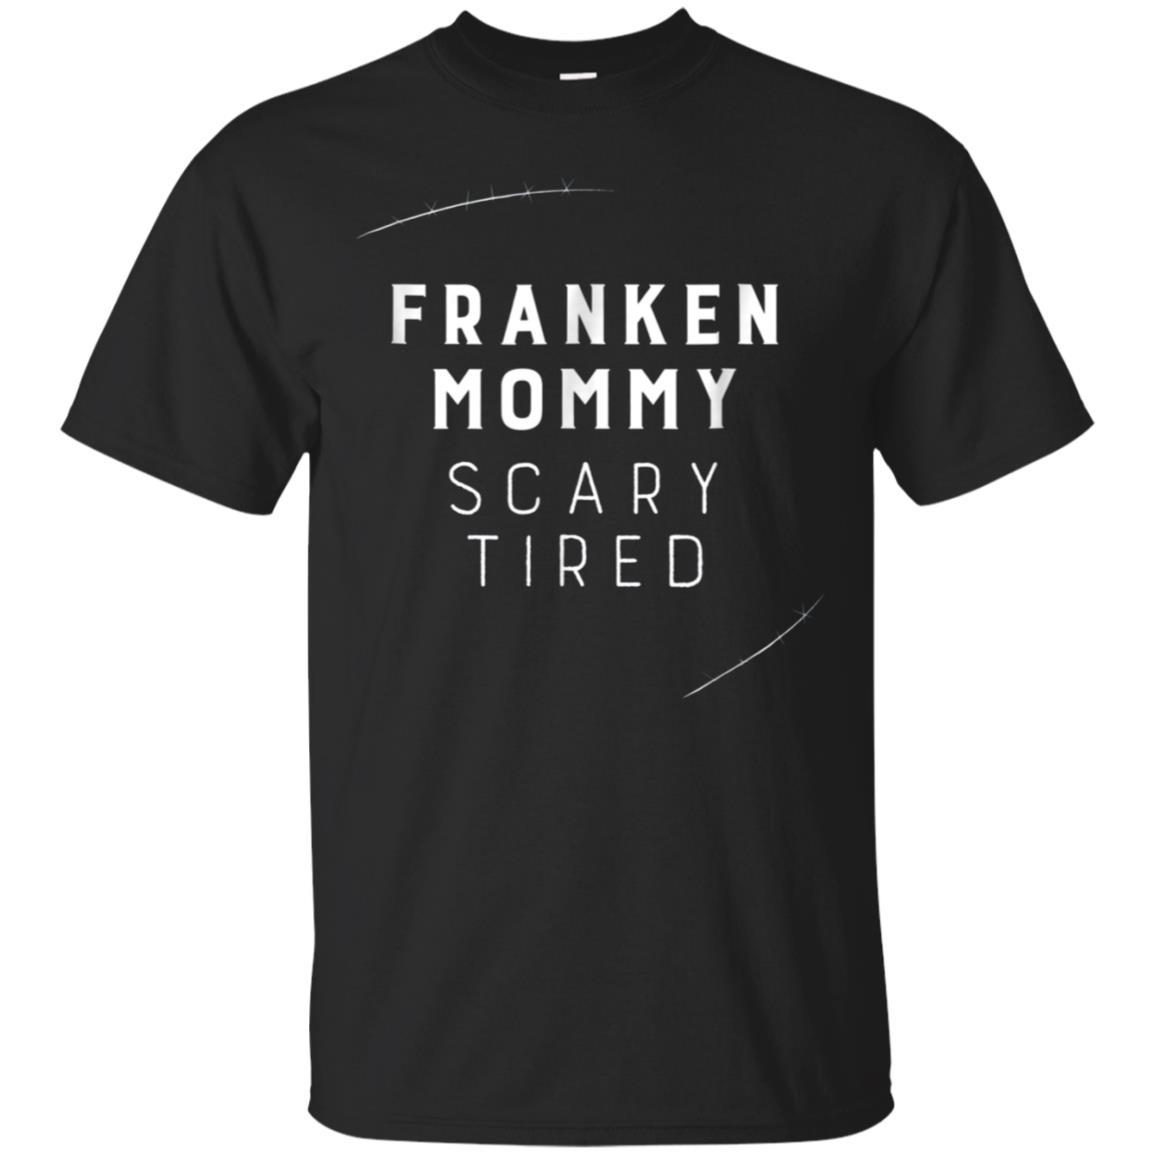 Check Out This Awesome Franken Mommy Scary Tired Funny Halloween Tshirt